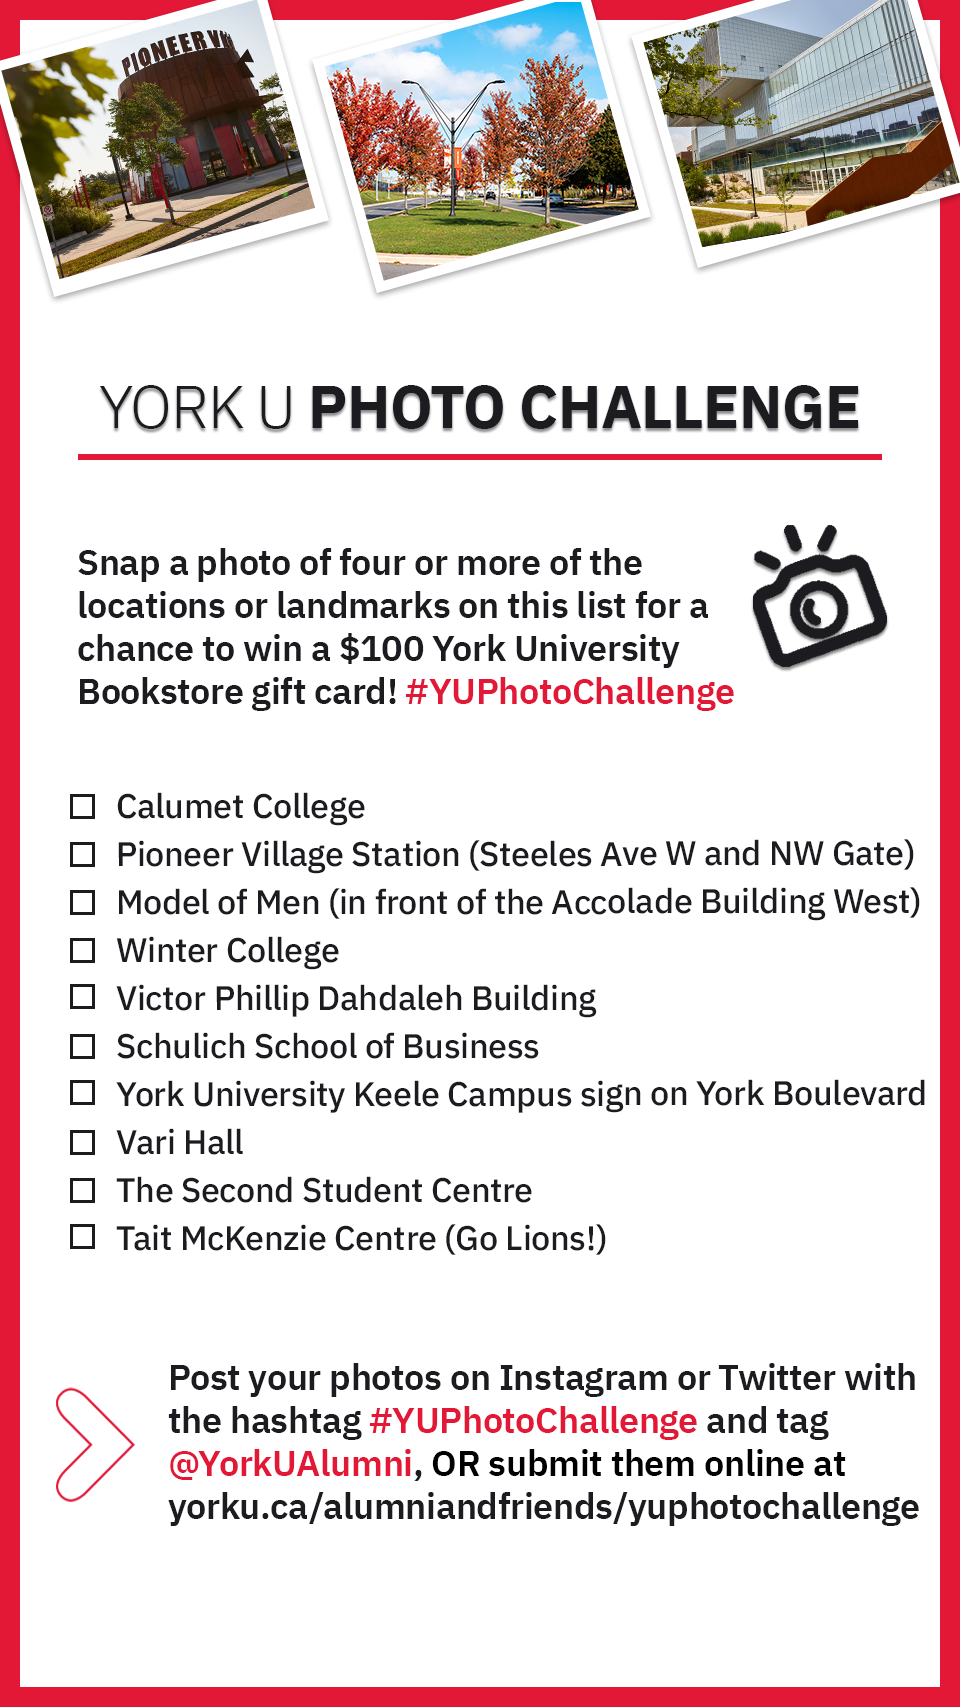 York U Photo Challenge checklist:   1. Calumet College;   2. Pioneer Village Station (the other station on York University's Keele campus);  3. Model of Men (in front of the Accolade Building West); 4. Winter College;  5. Victor Phillip Dahdaleh Building;  6. Schulich School of Business;  7. York University Keele Campus sign on York Boulevard;  8. Vari Hall;  9. The Second Student Centre;  10. Tait McKenzie Centre (Go Lions!) 